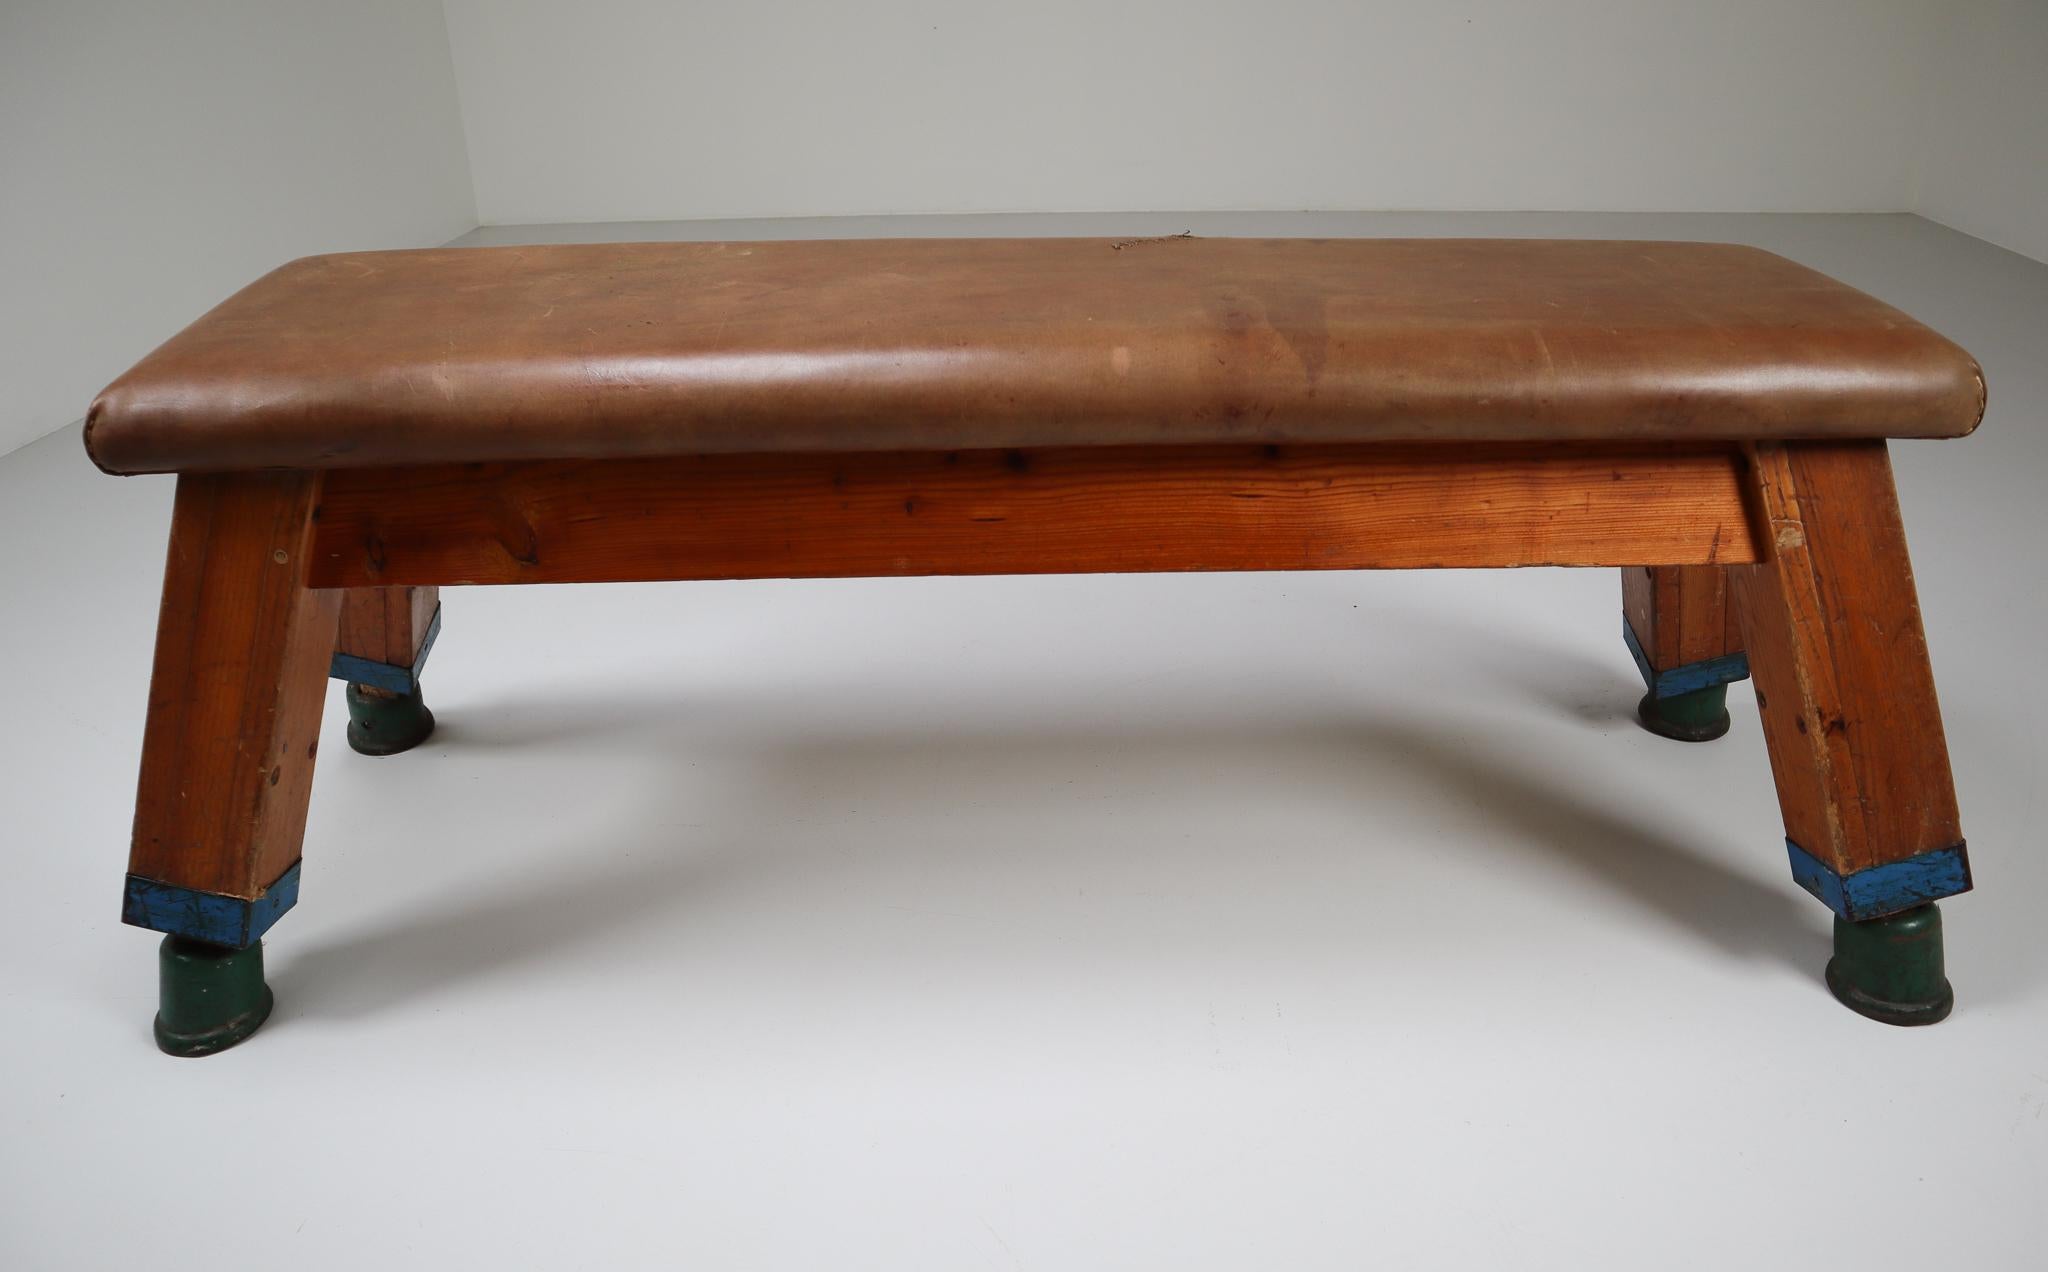 Strong, vintage European gymnasium bench with a patinated leather covered top that sits in to the bench's solid wooden frame. The gym bench frame maintains its original markings where the straps and rings were once held. Can be used as a coffee,